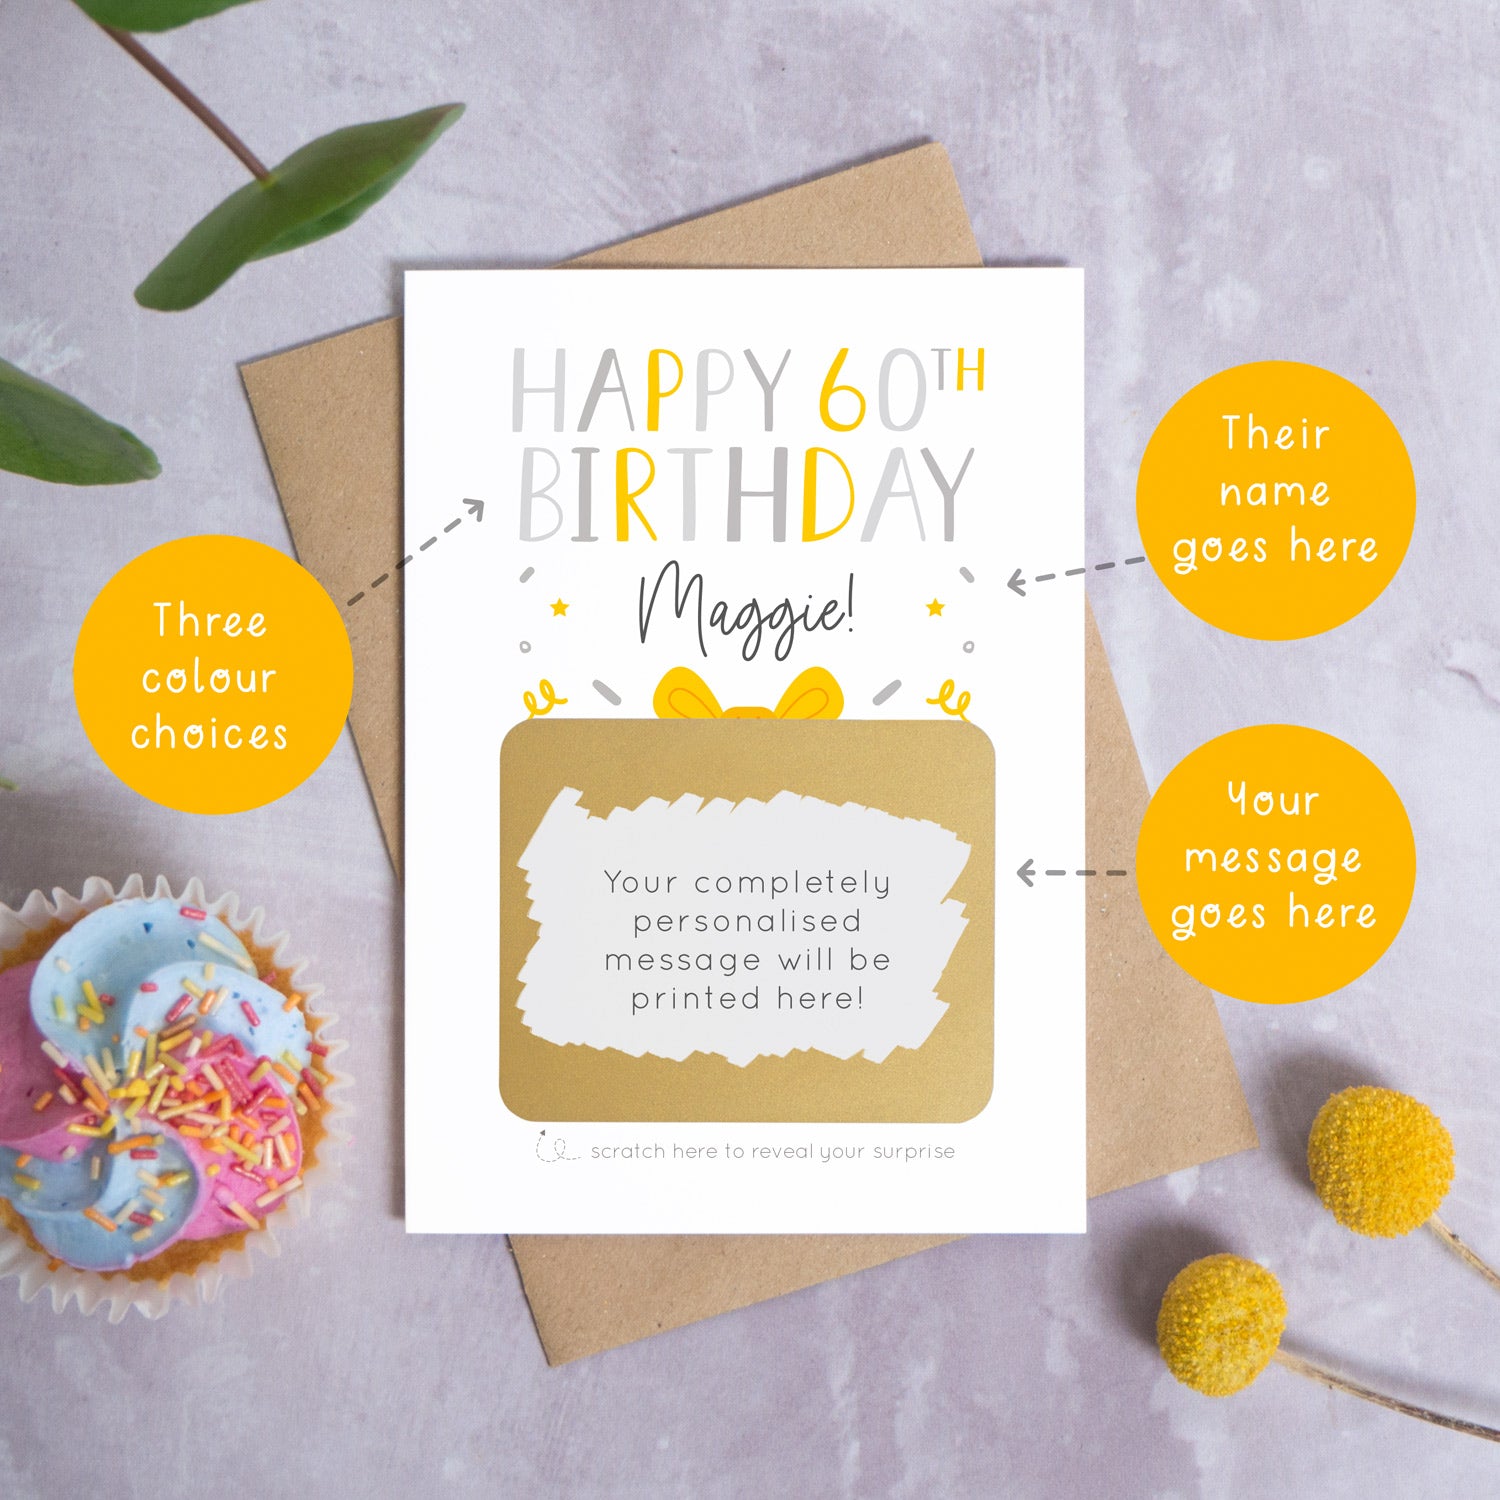 A personalised happy 60th birthday scratch card in grey that has been photographed on a grey background with foliage and a cupcake. There are also orange circles laid over the top of this image with arrows pointing to the areas that can be customised. In this instance they point to the name, the colour choices and the personalised scratch off message.